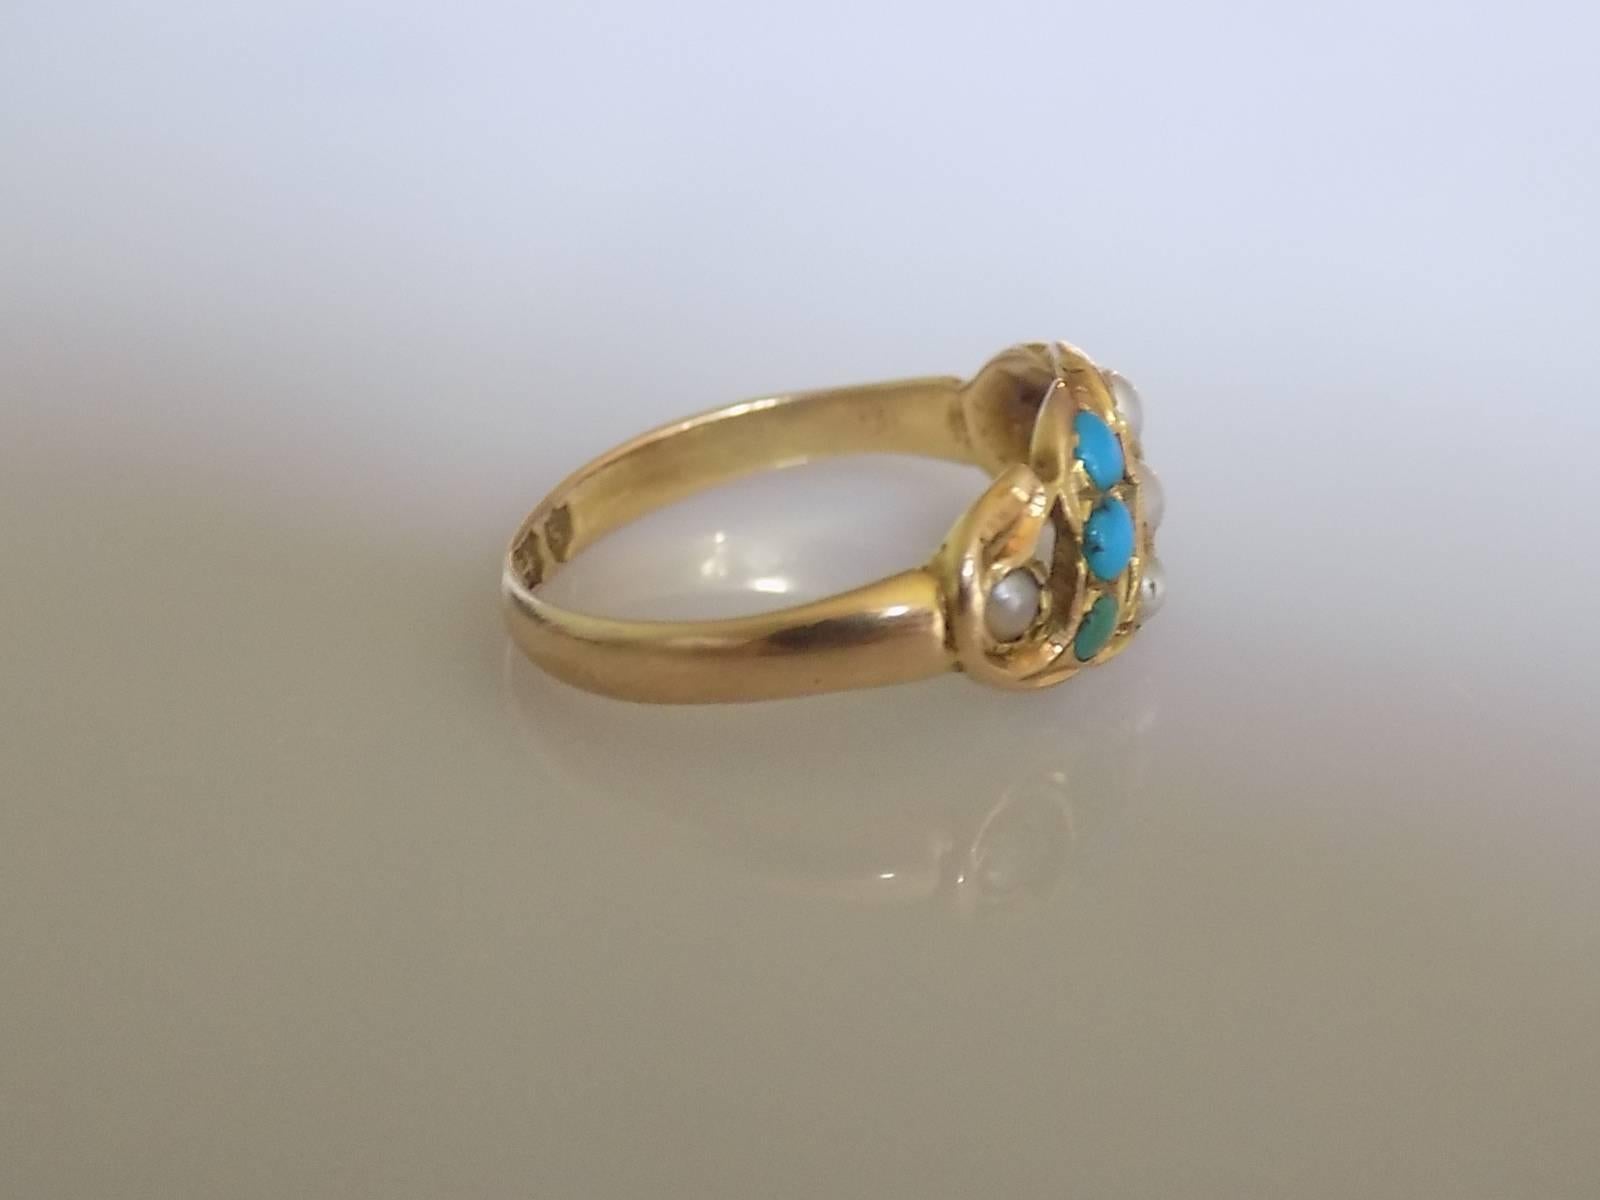 A Lovely Victorian c.1893 15 Carat Rose Gold, split seed Pearl and Turquoise ring. English Origin.

Size J 1/2 UK, 5 US.

Height of the face 9mm. 

Weight 2.1gr.

Full Birmingham hallmark for 15 Carat Gold.

Ring fully complete with a